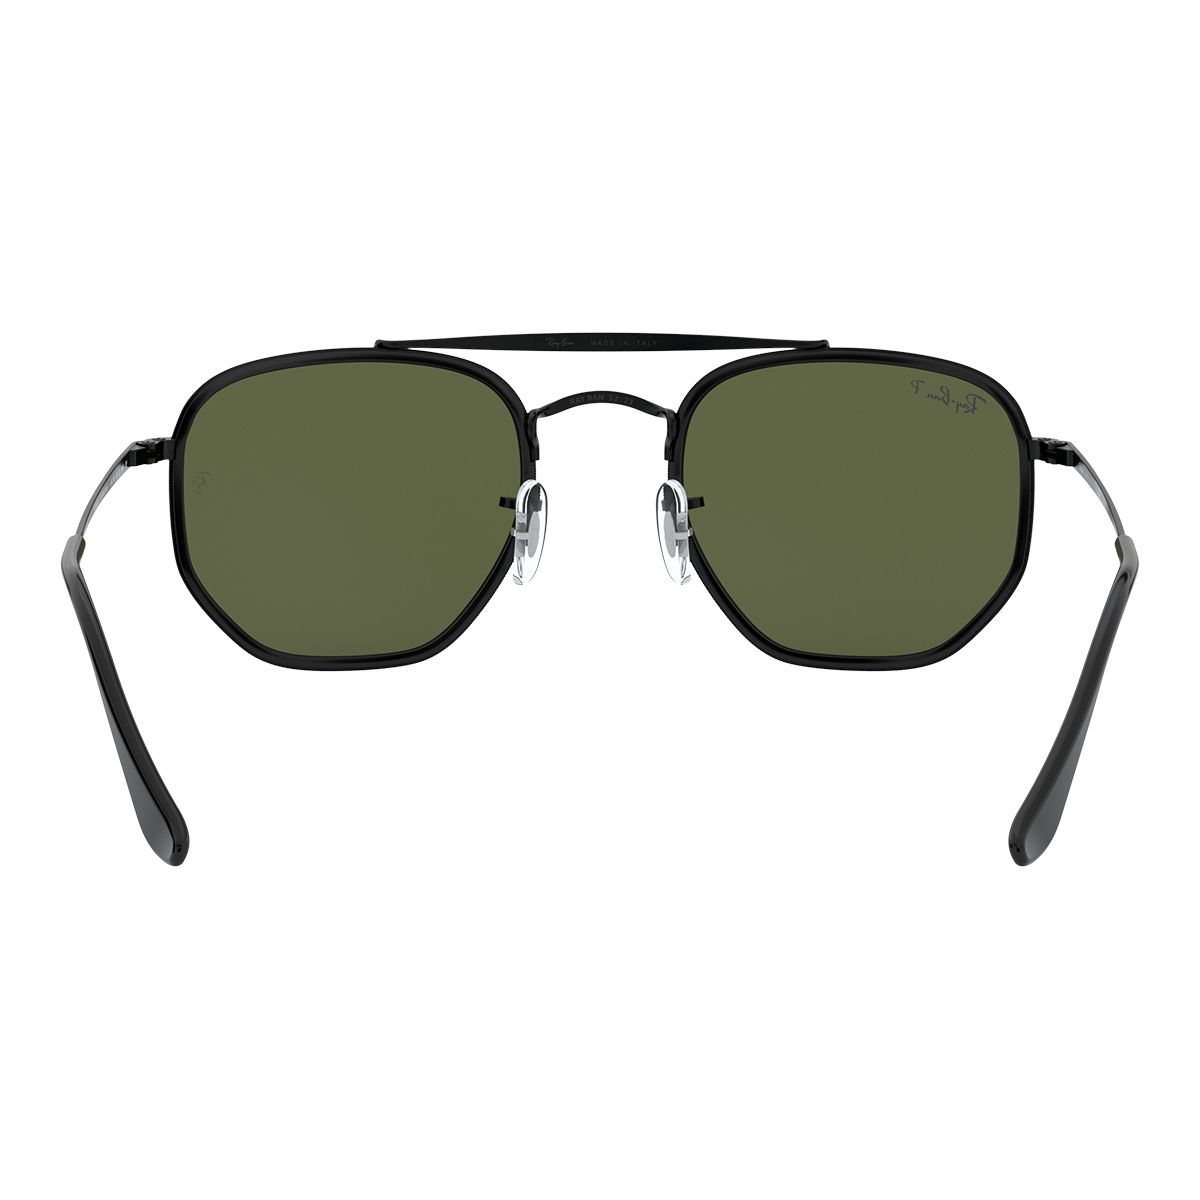 Discover more than 150 marshal 2 sunglasses best